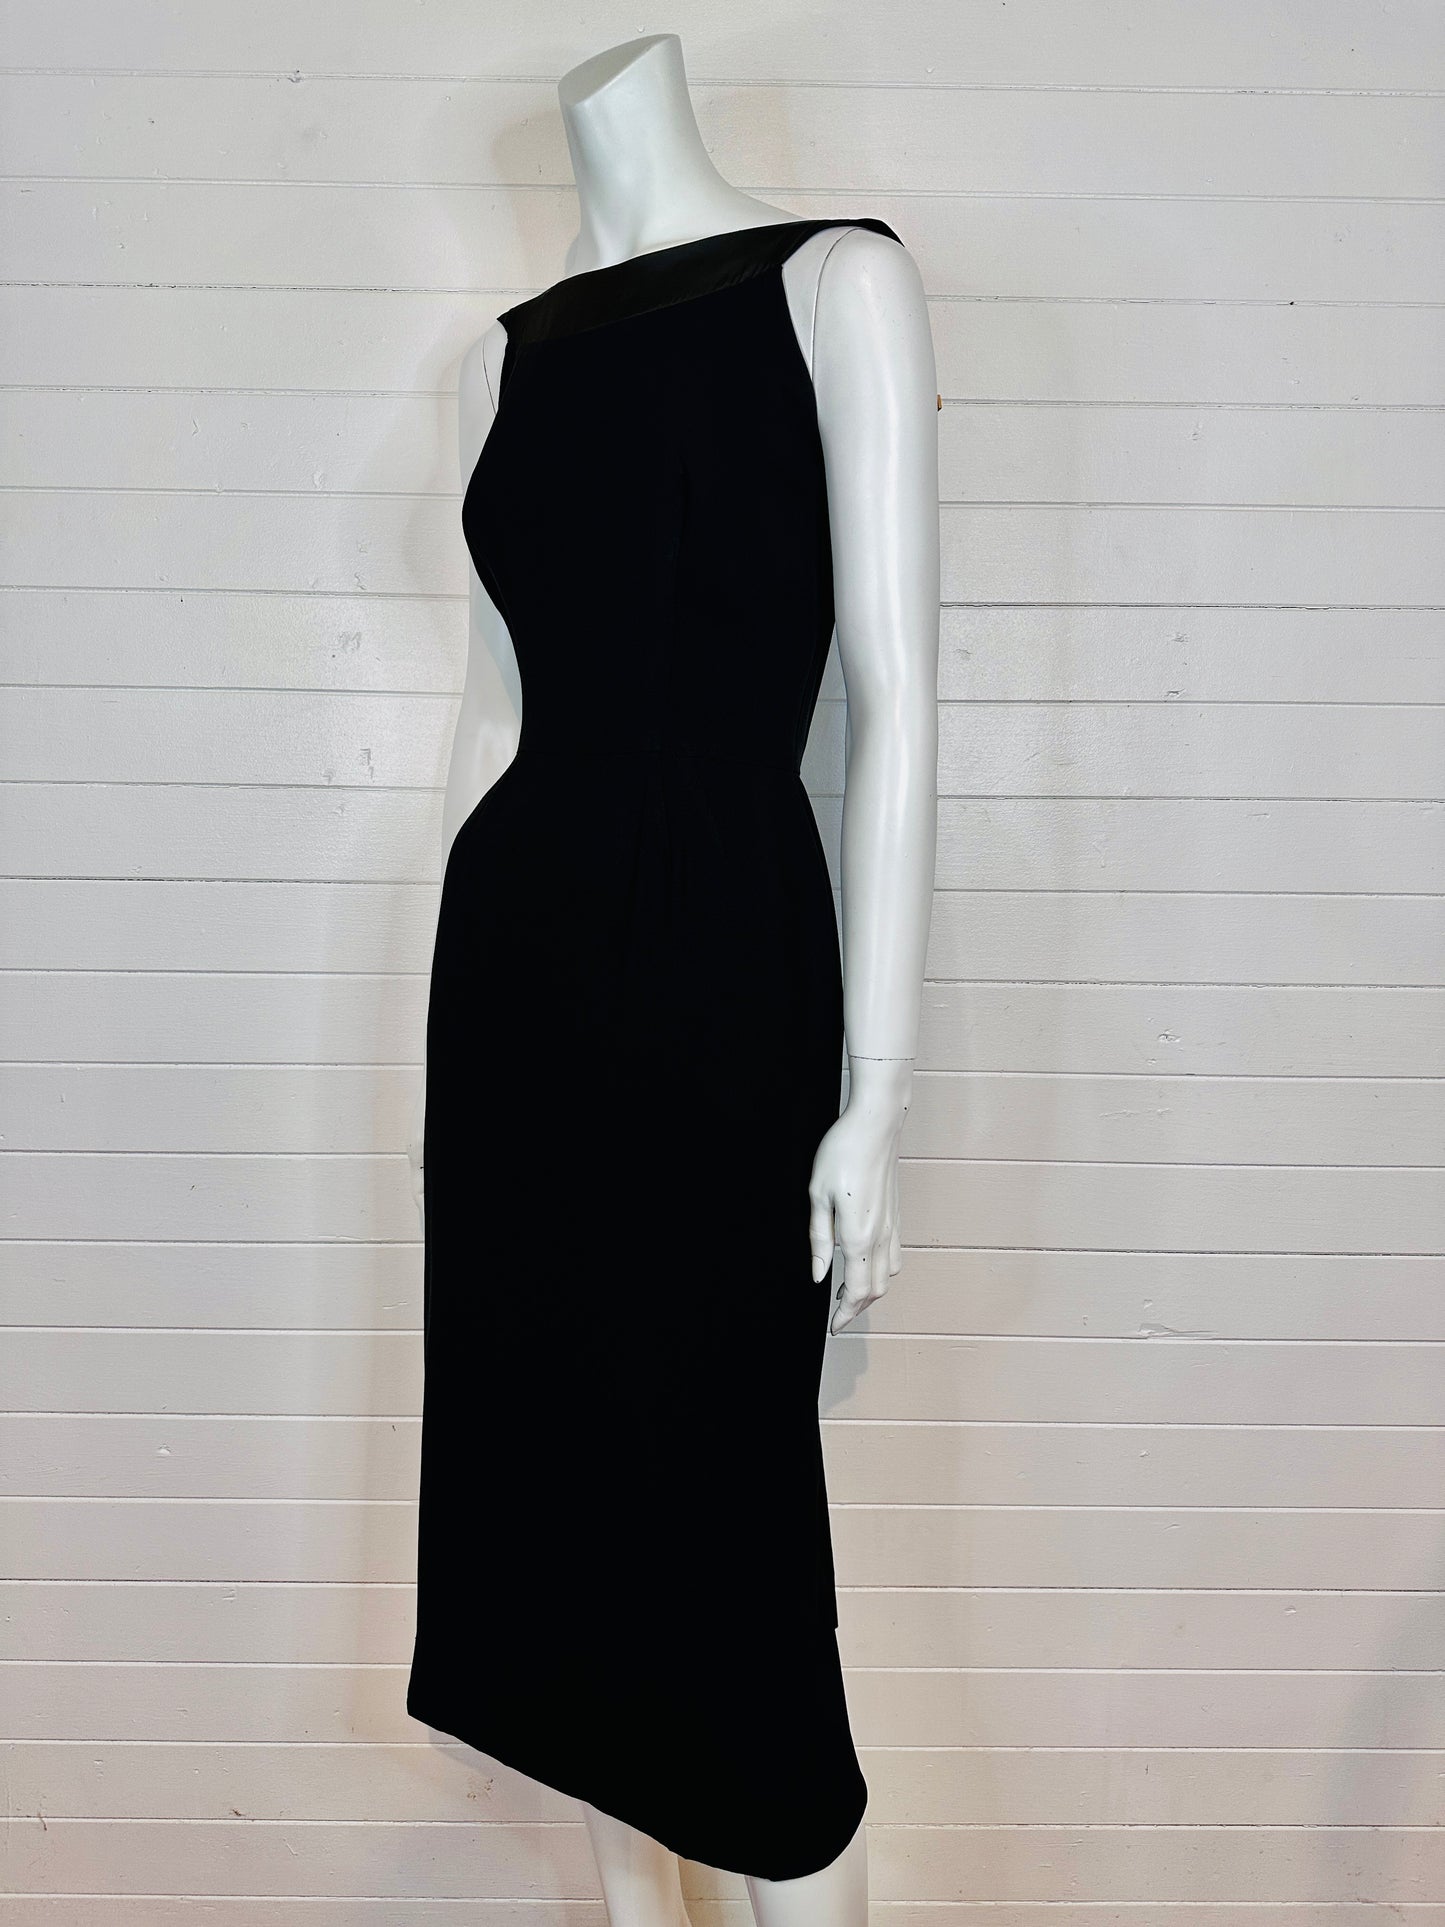 1950's to 1960's Breakfast at Tiffany's Holly Golightly Little Black Dress (S)